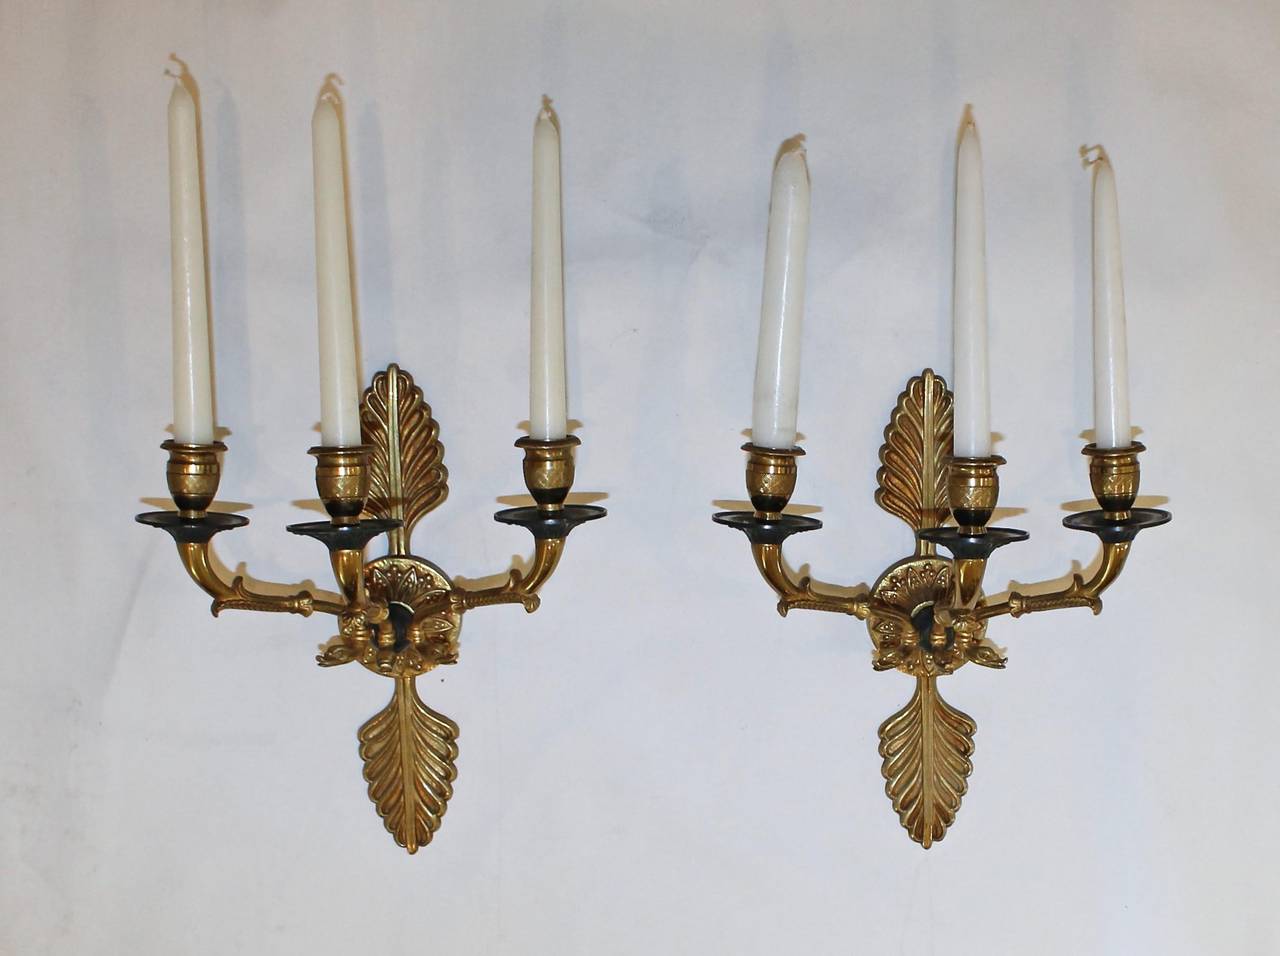 Pair of French Empire Style Doré Wall Sconces In Good Condition For Sale In Dallas, TX